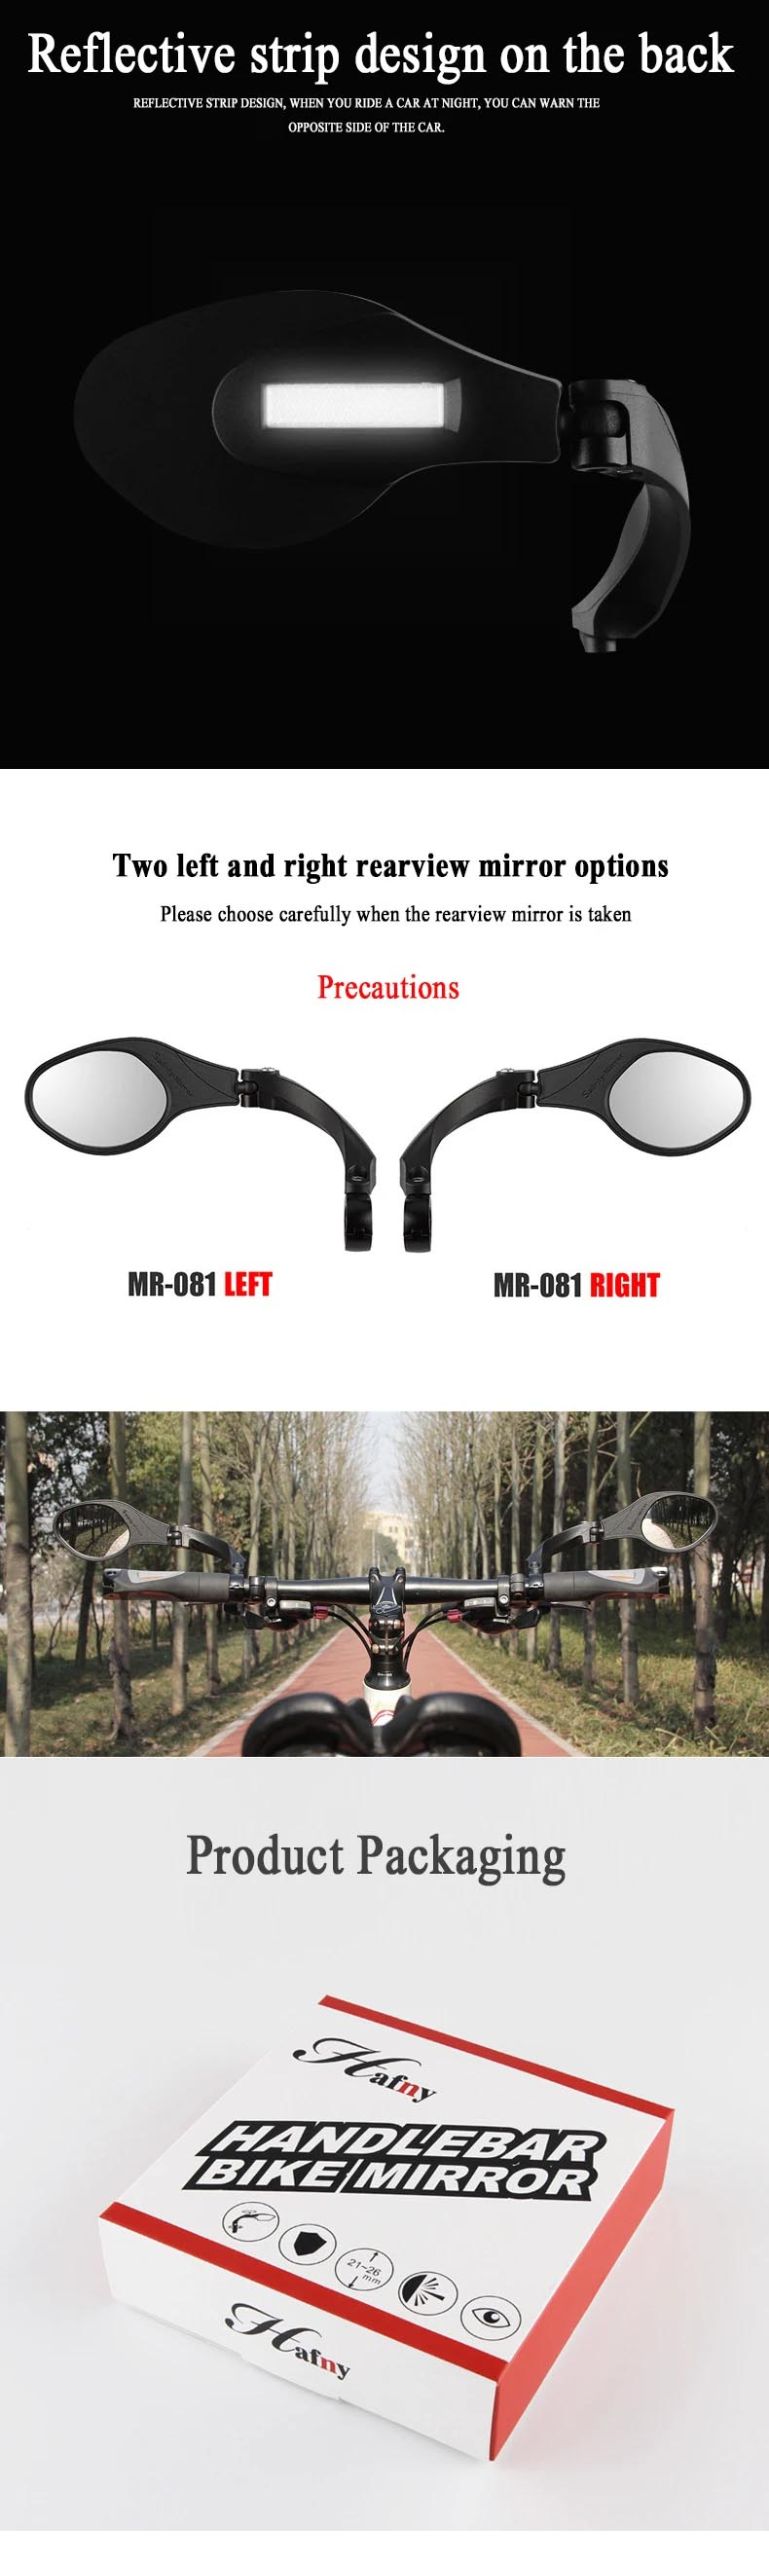 mountain bike mirror stainless steel lens foldable convex mirror bicycle parts accessories - bicycle rearview mirror - 1